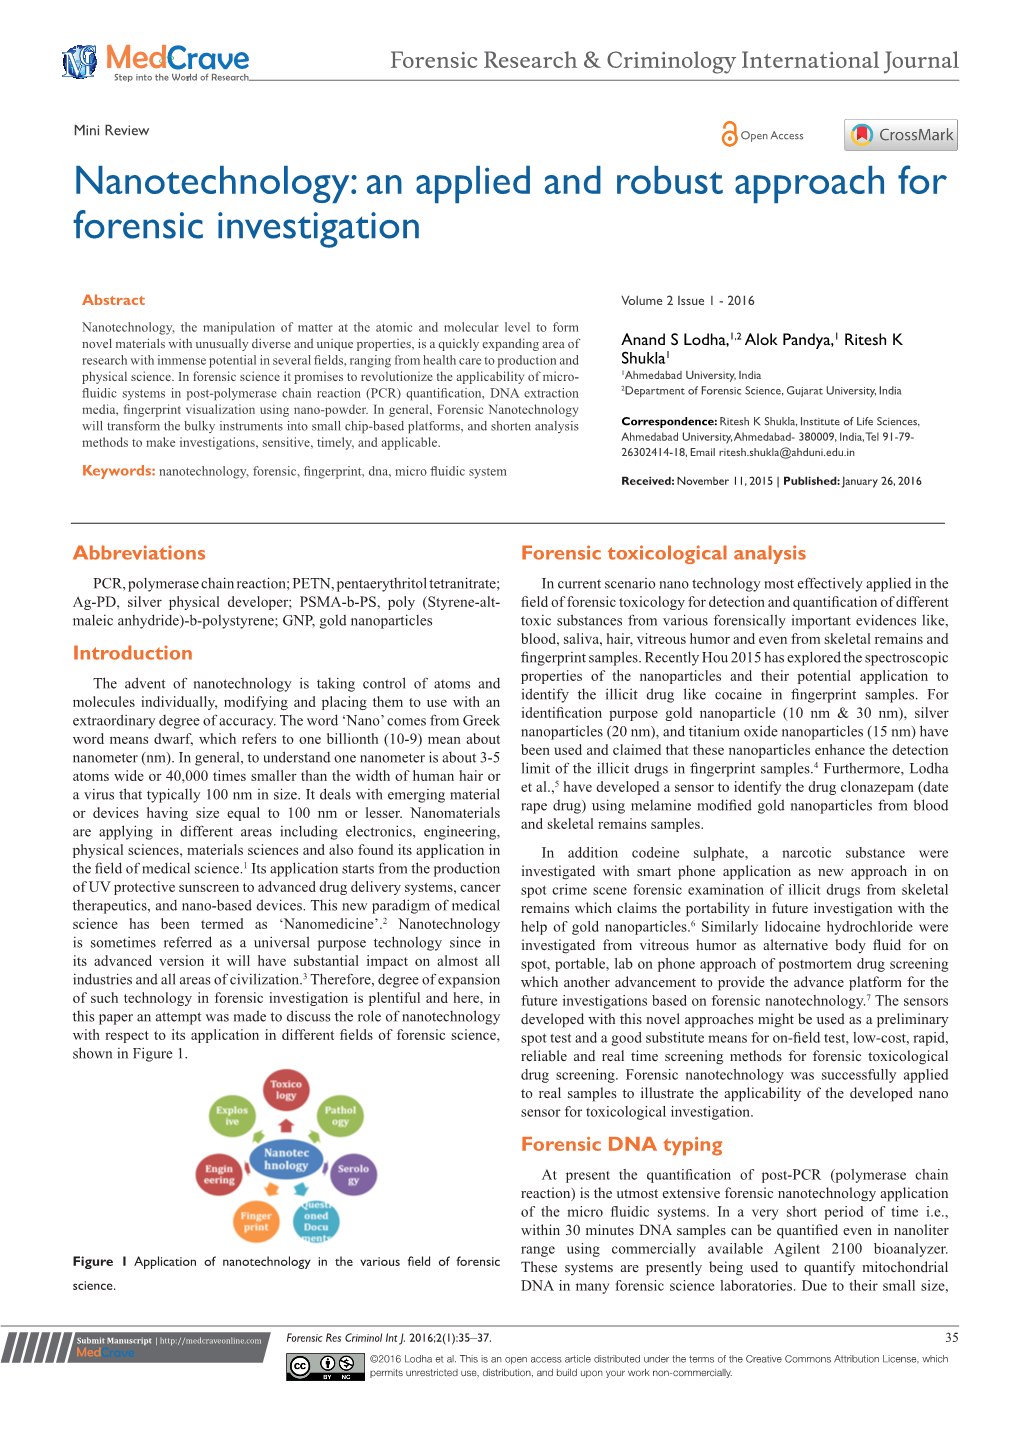 An Applied and Robust Approach for Forensic Investigation